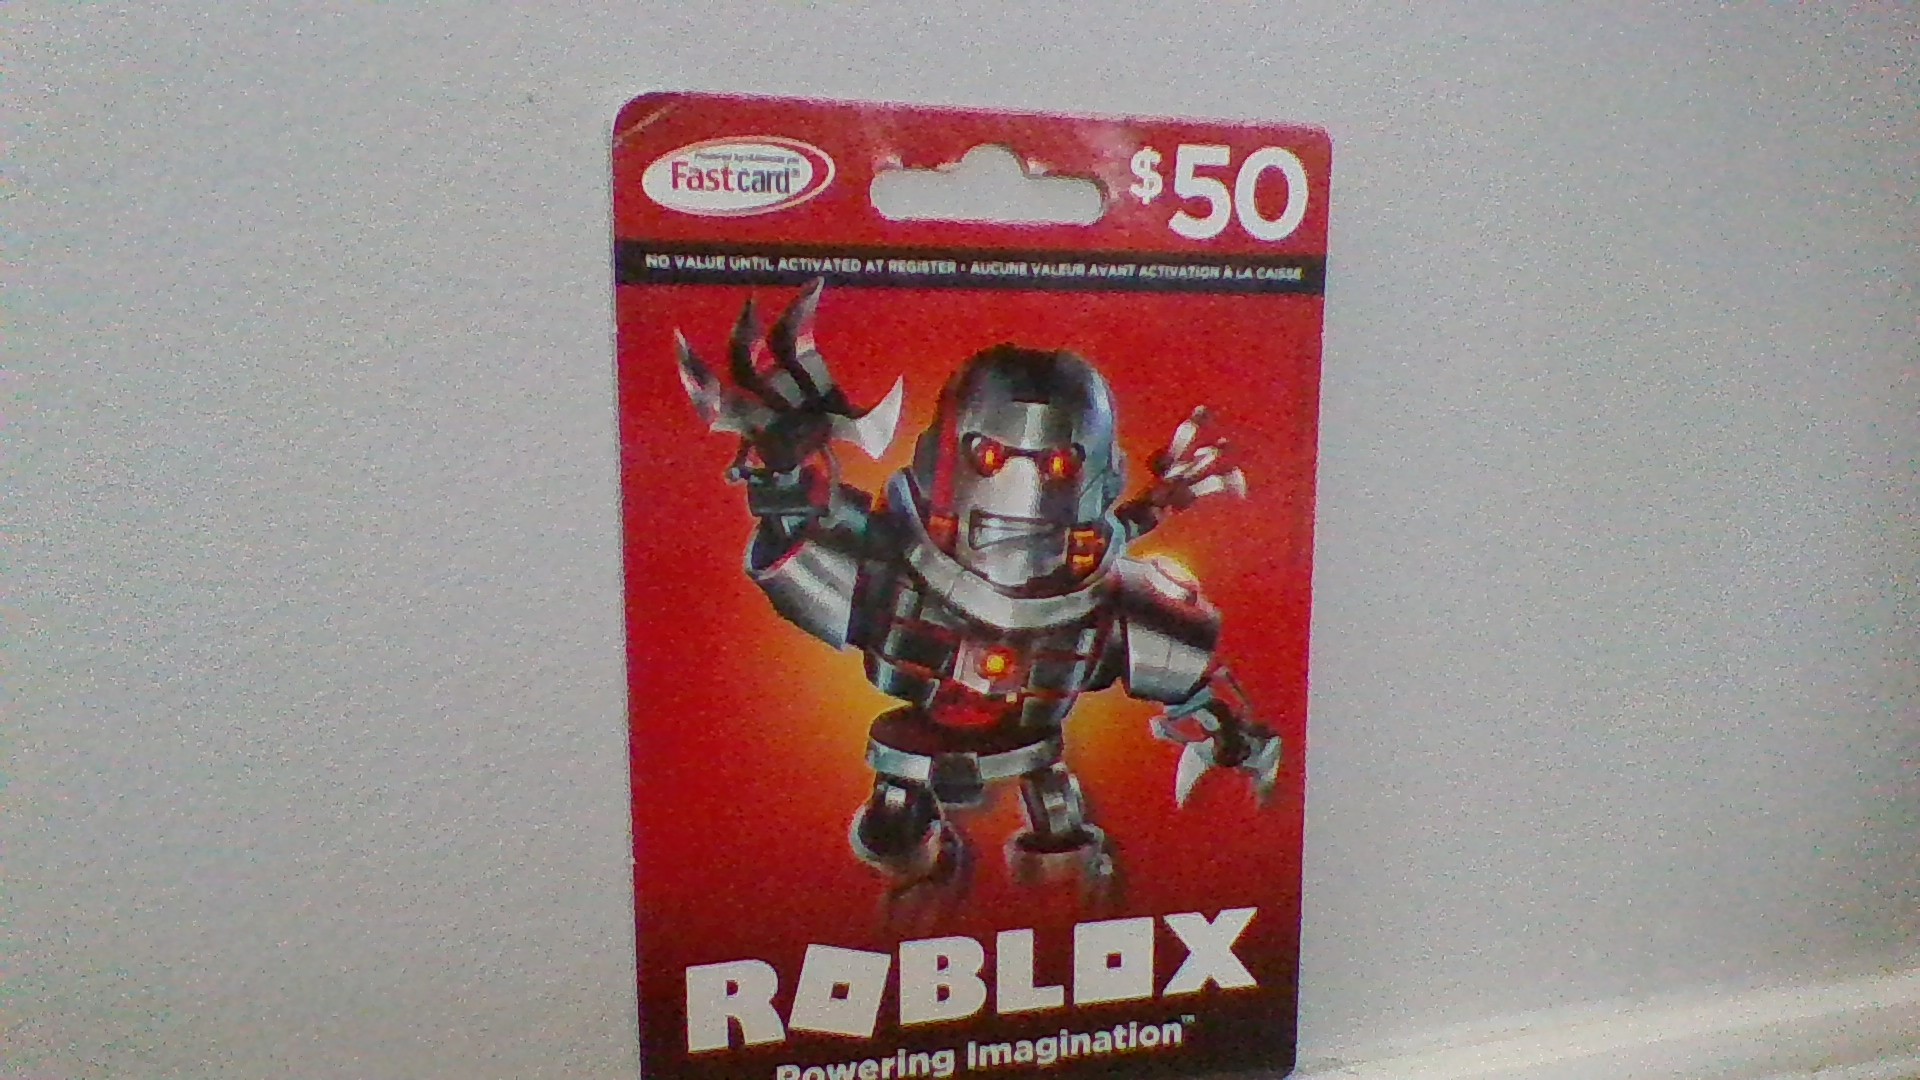 Abee On Twitter New Giveaway Prize 50 Roblox Giftcard Rules Follow Me Retweet This Post A Tweet Saying Im Doing A Giveaway And Tag Me Like This Tweet Ends At - anne on twitter roblox toy code giveaway 30 winners